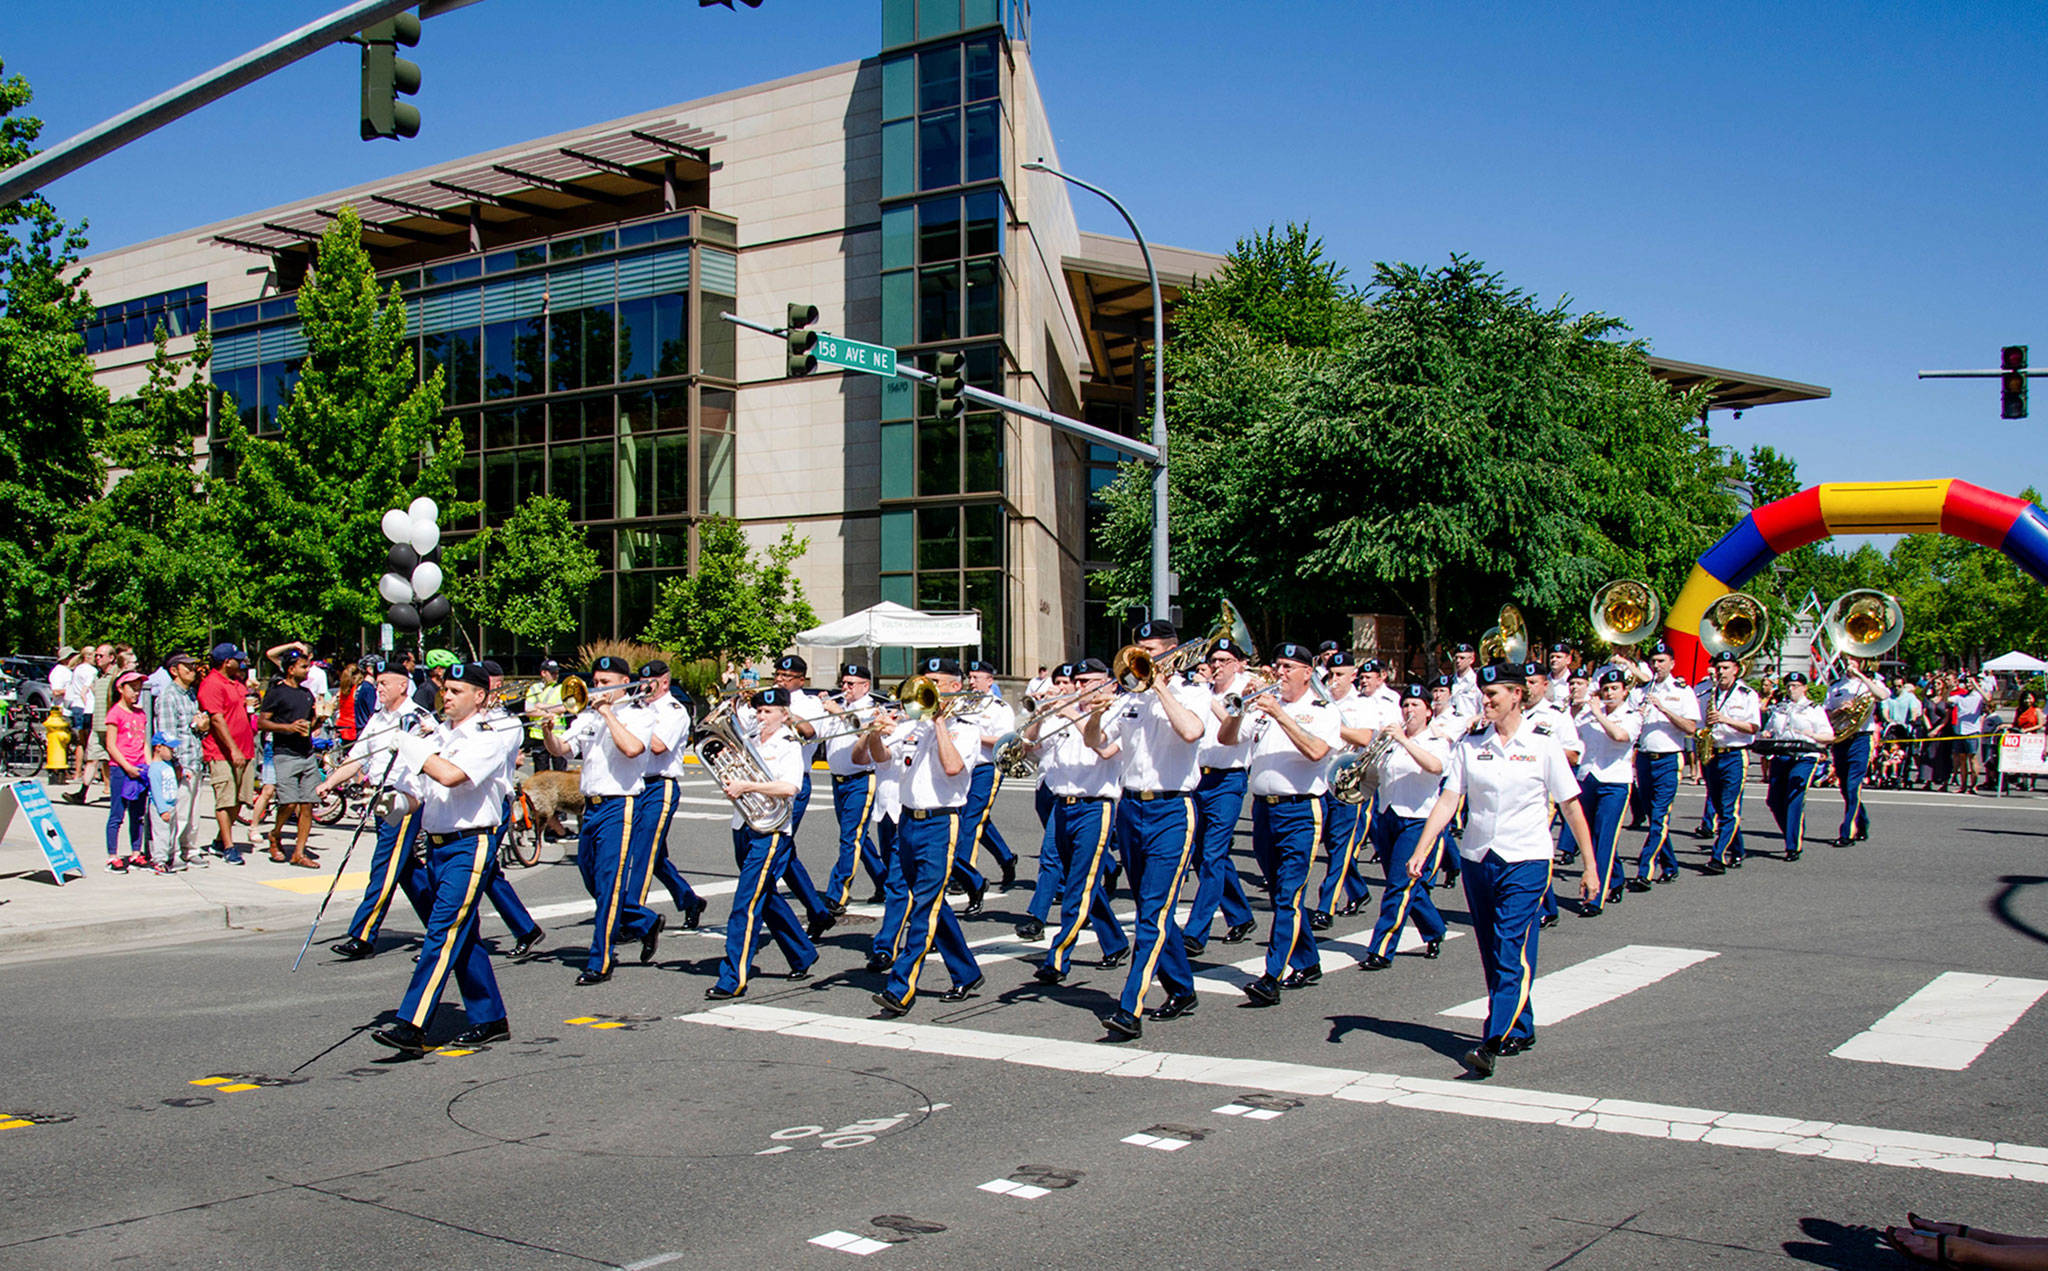 A band plays in the Derby Days grand parade. Photo courtesy of the city of Redmond